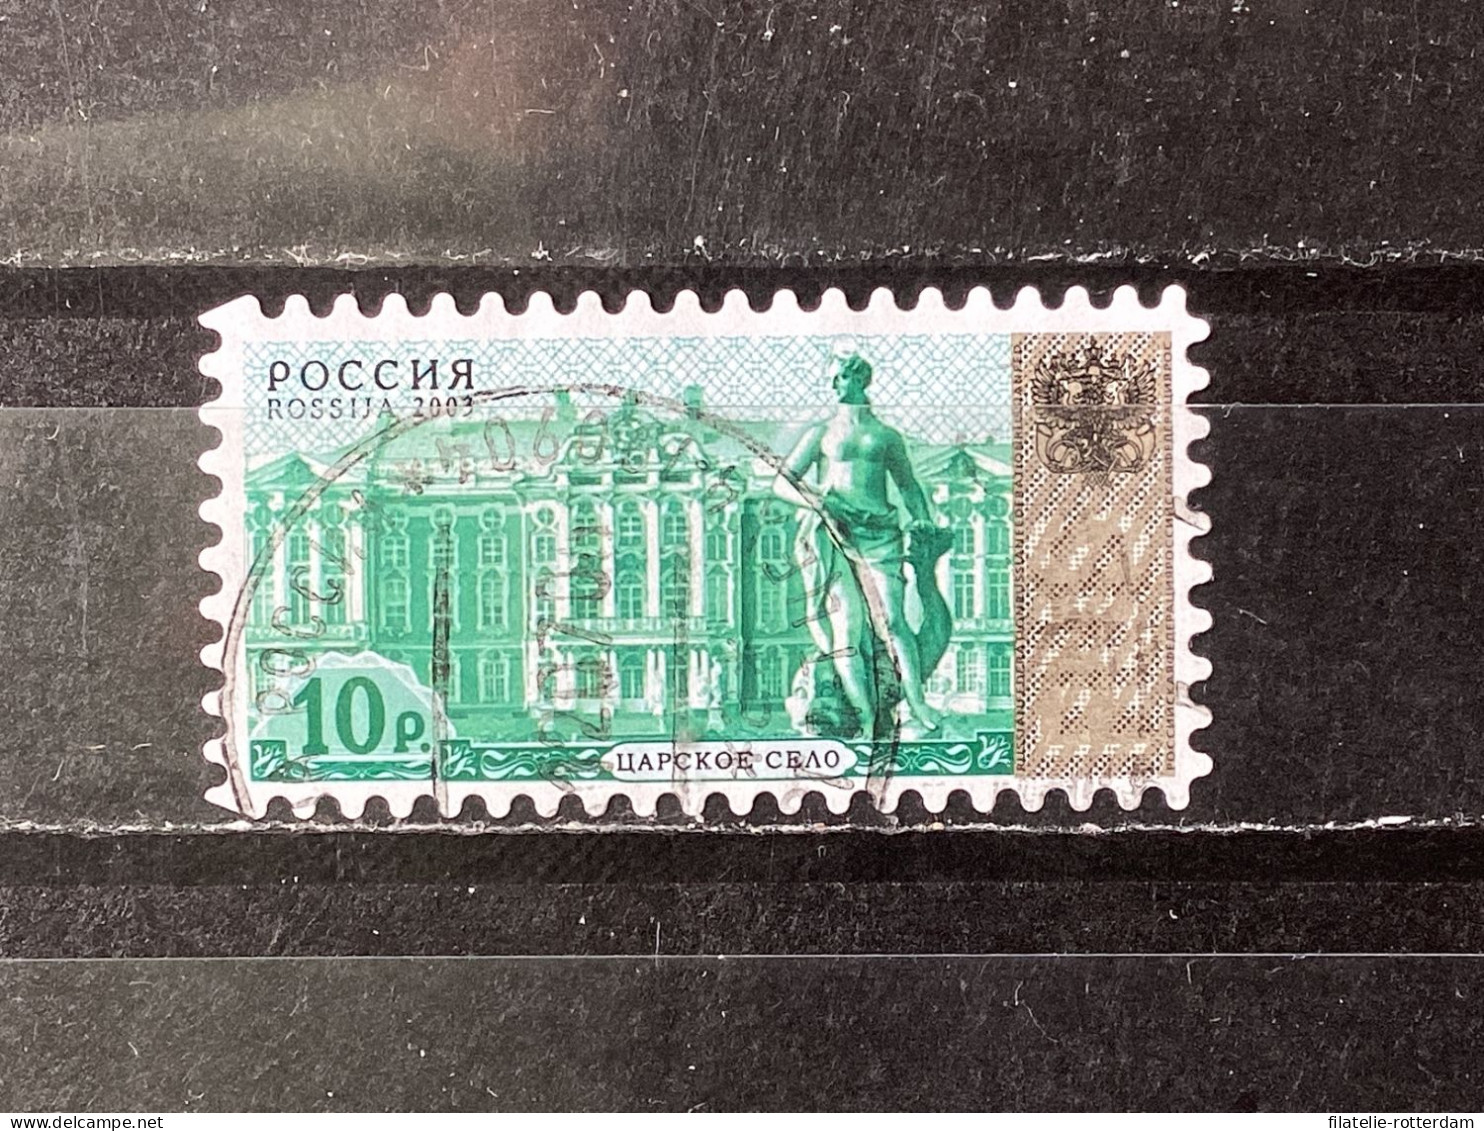 Russia / Rusland - Palaces (10) 2003 - Used Stamps